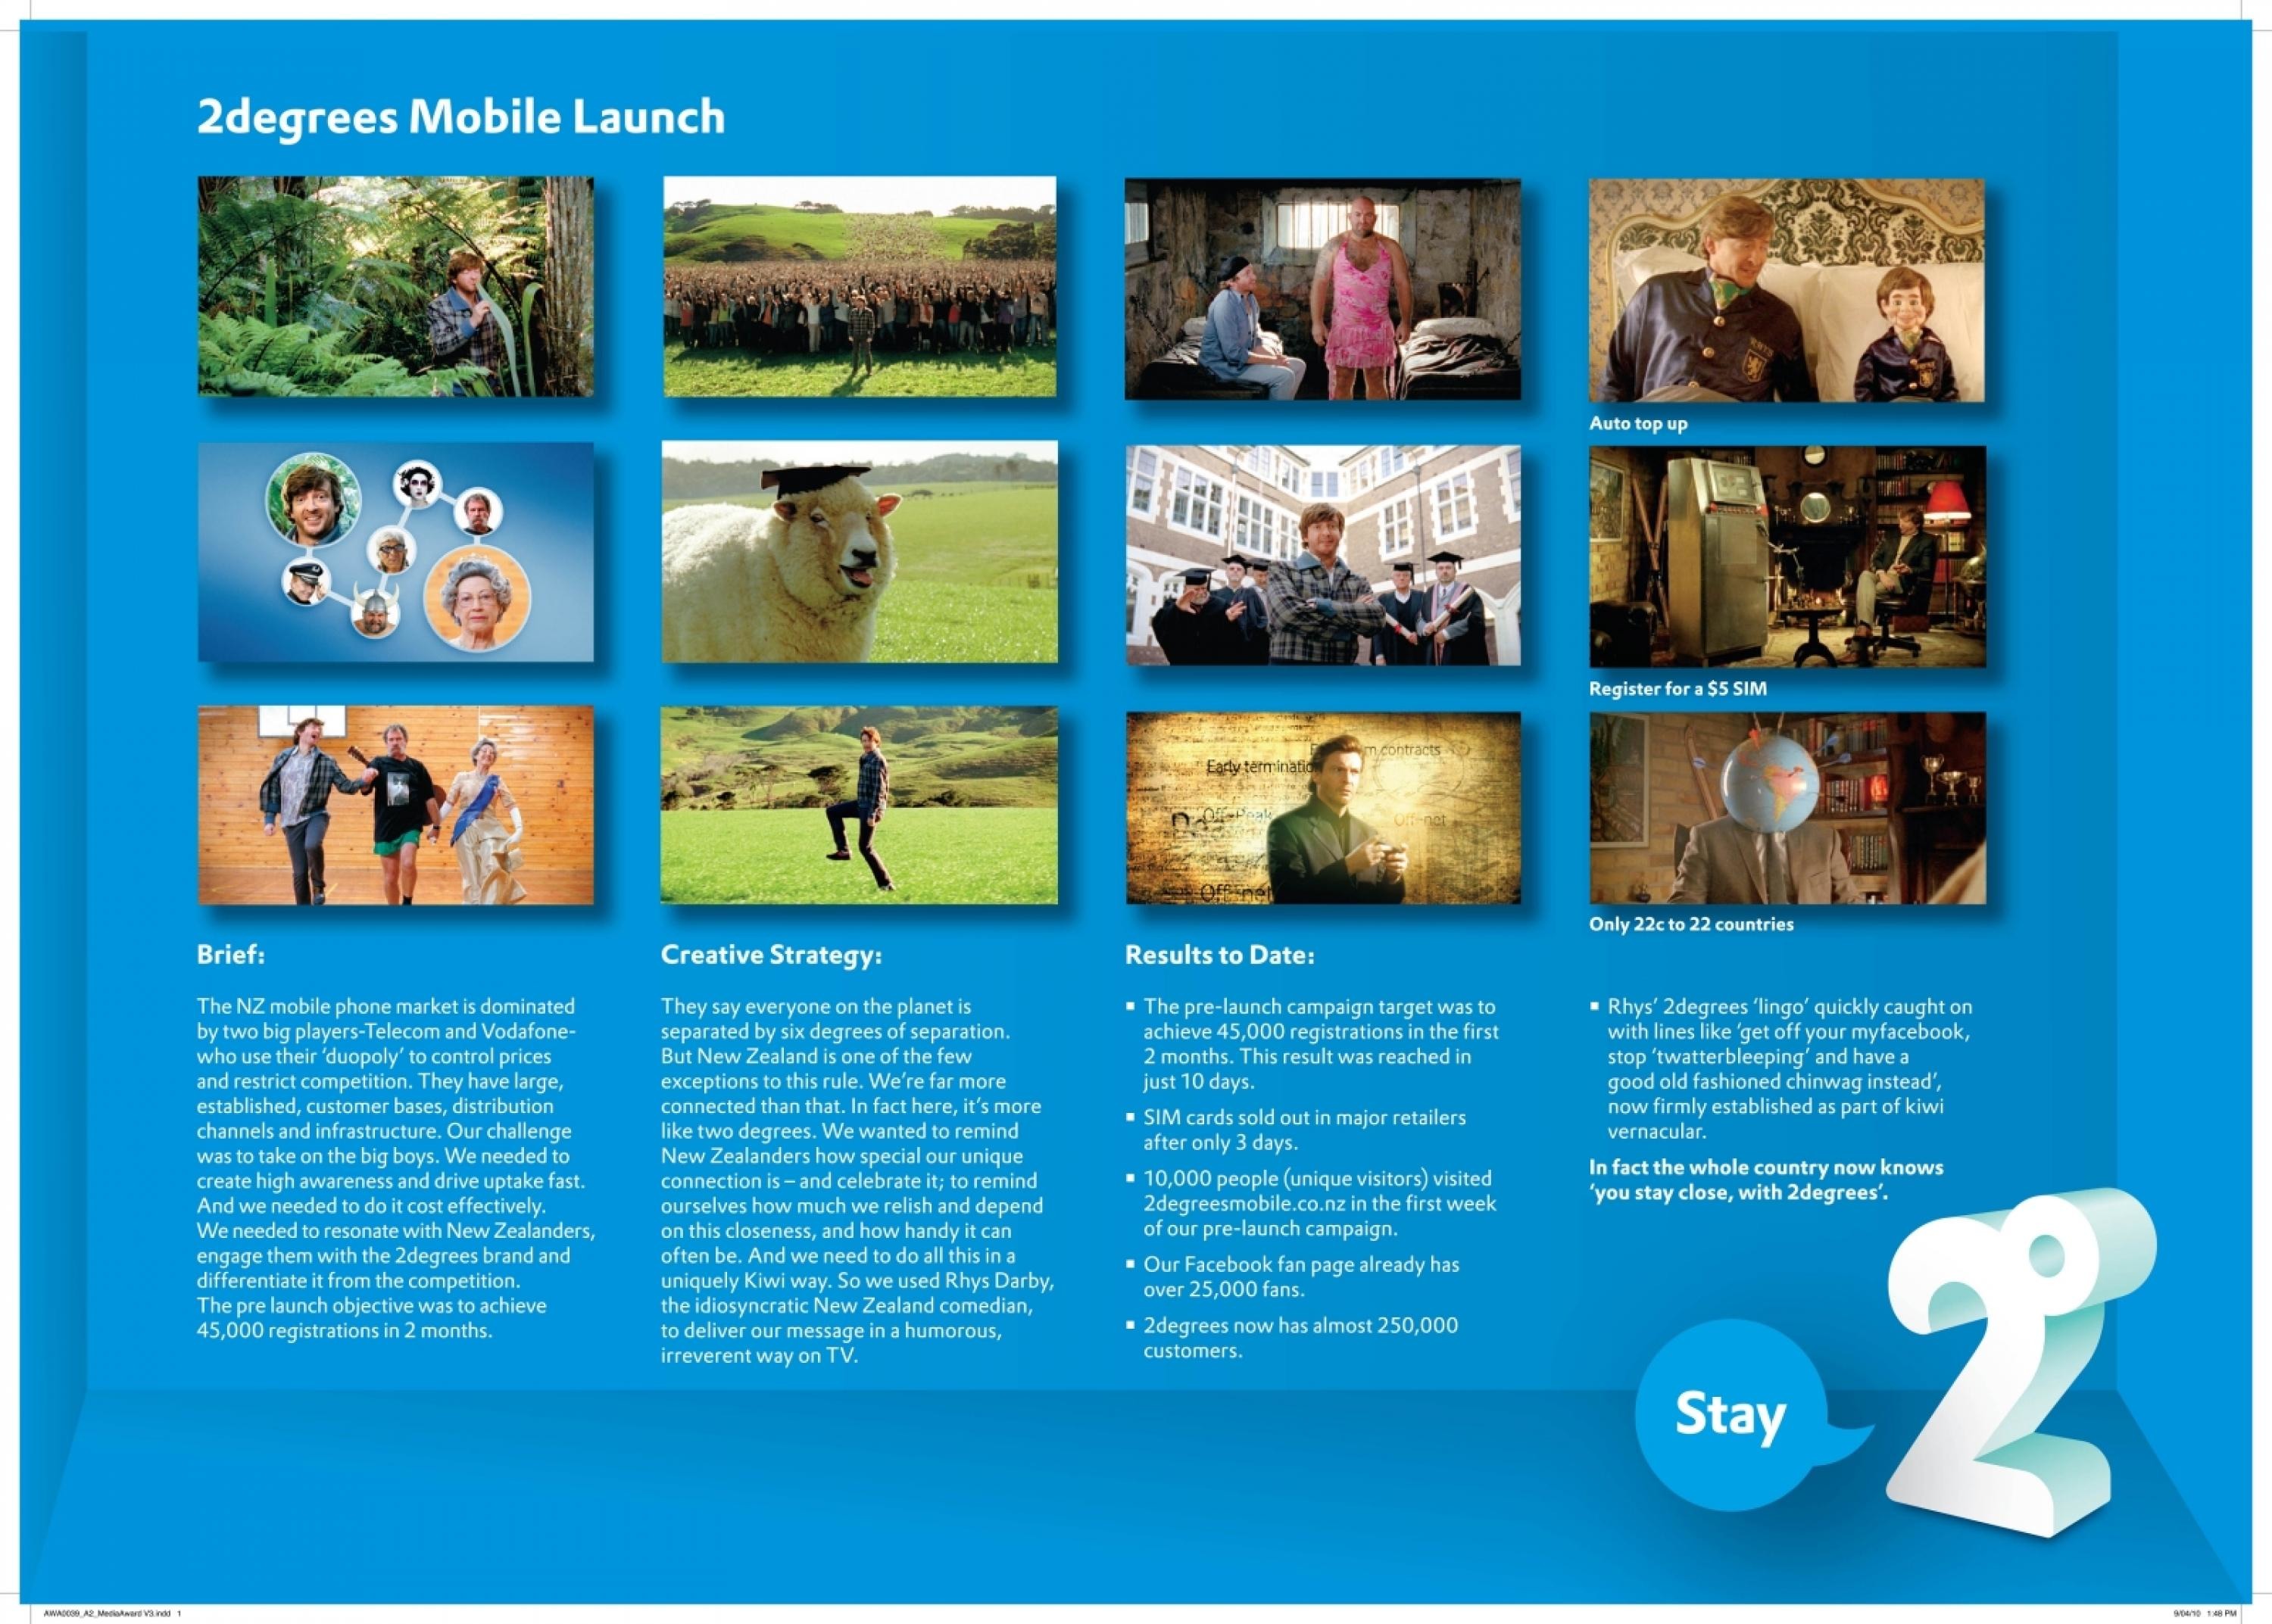 MOBILE PHONE COMPANY LAUNCH